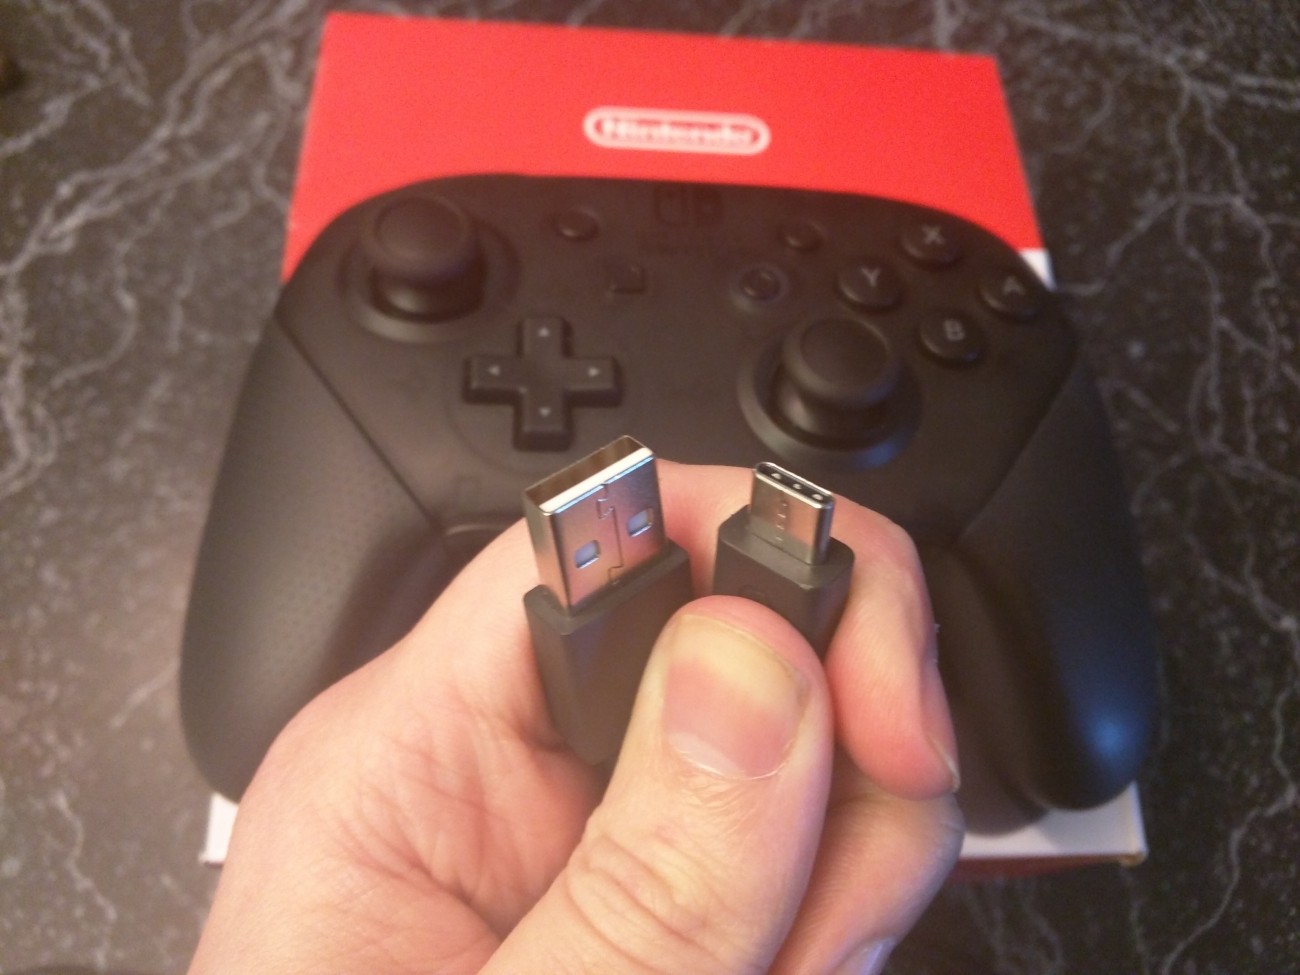 can you use usb controller on switch